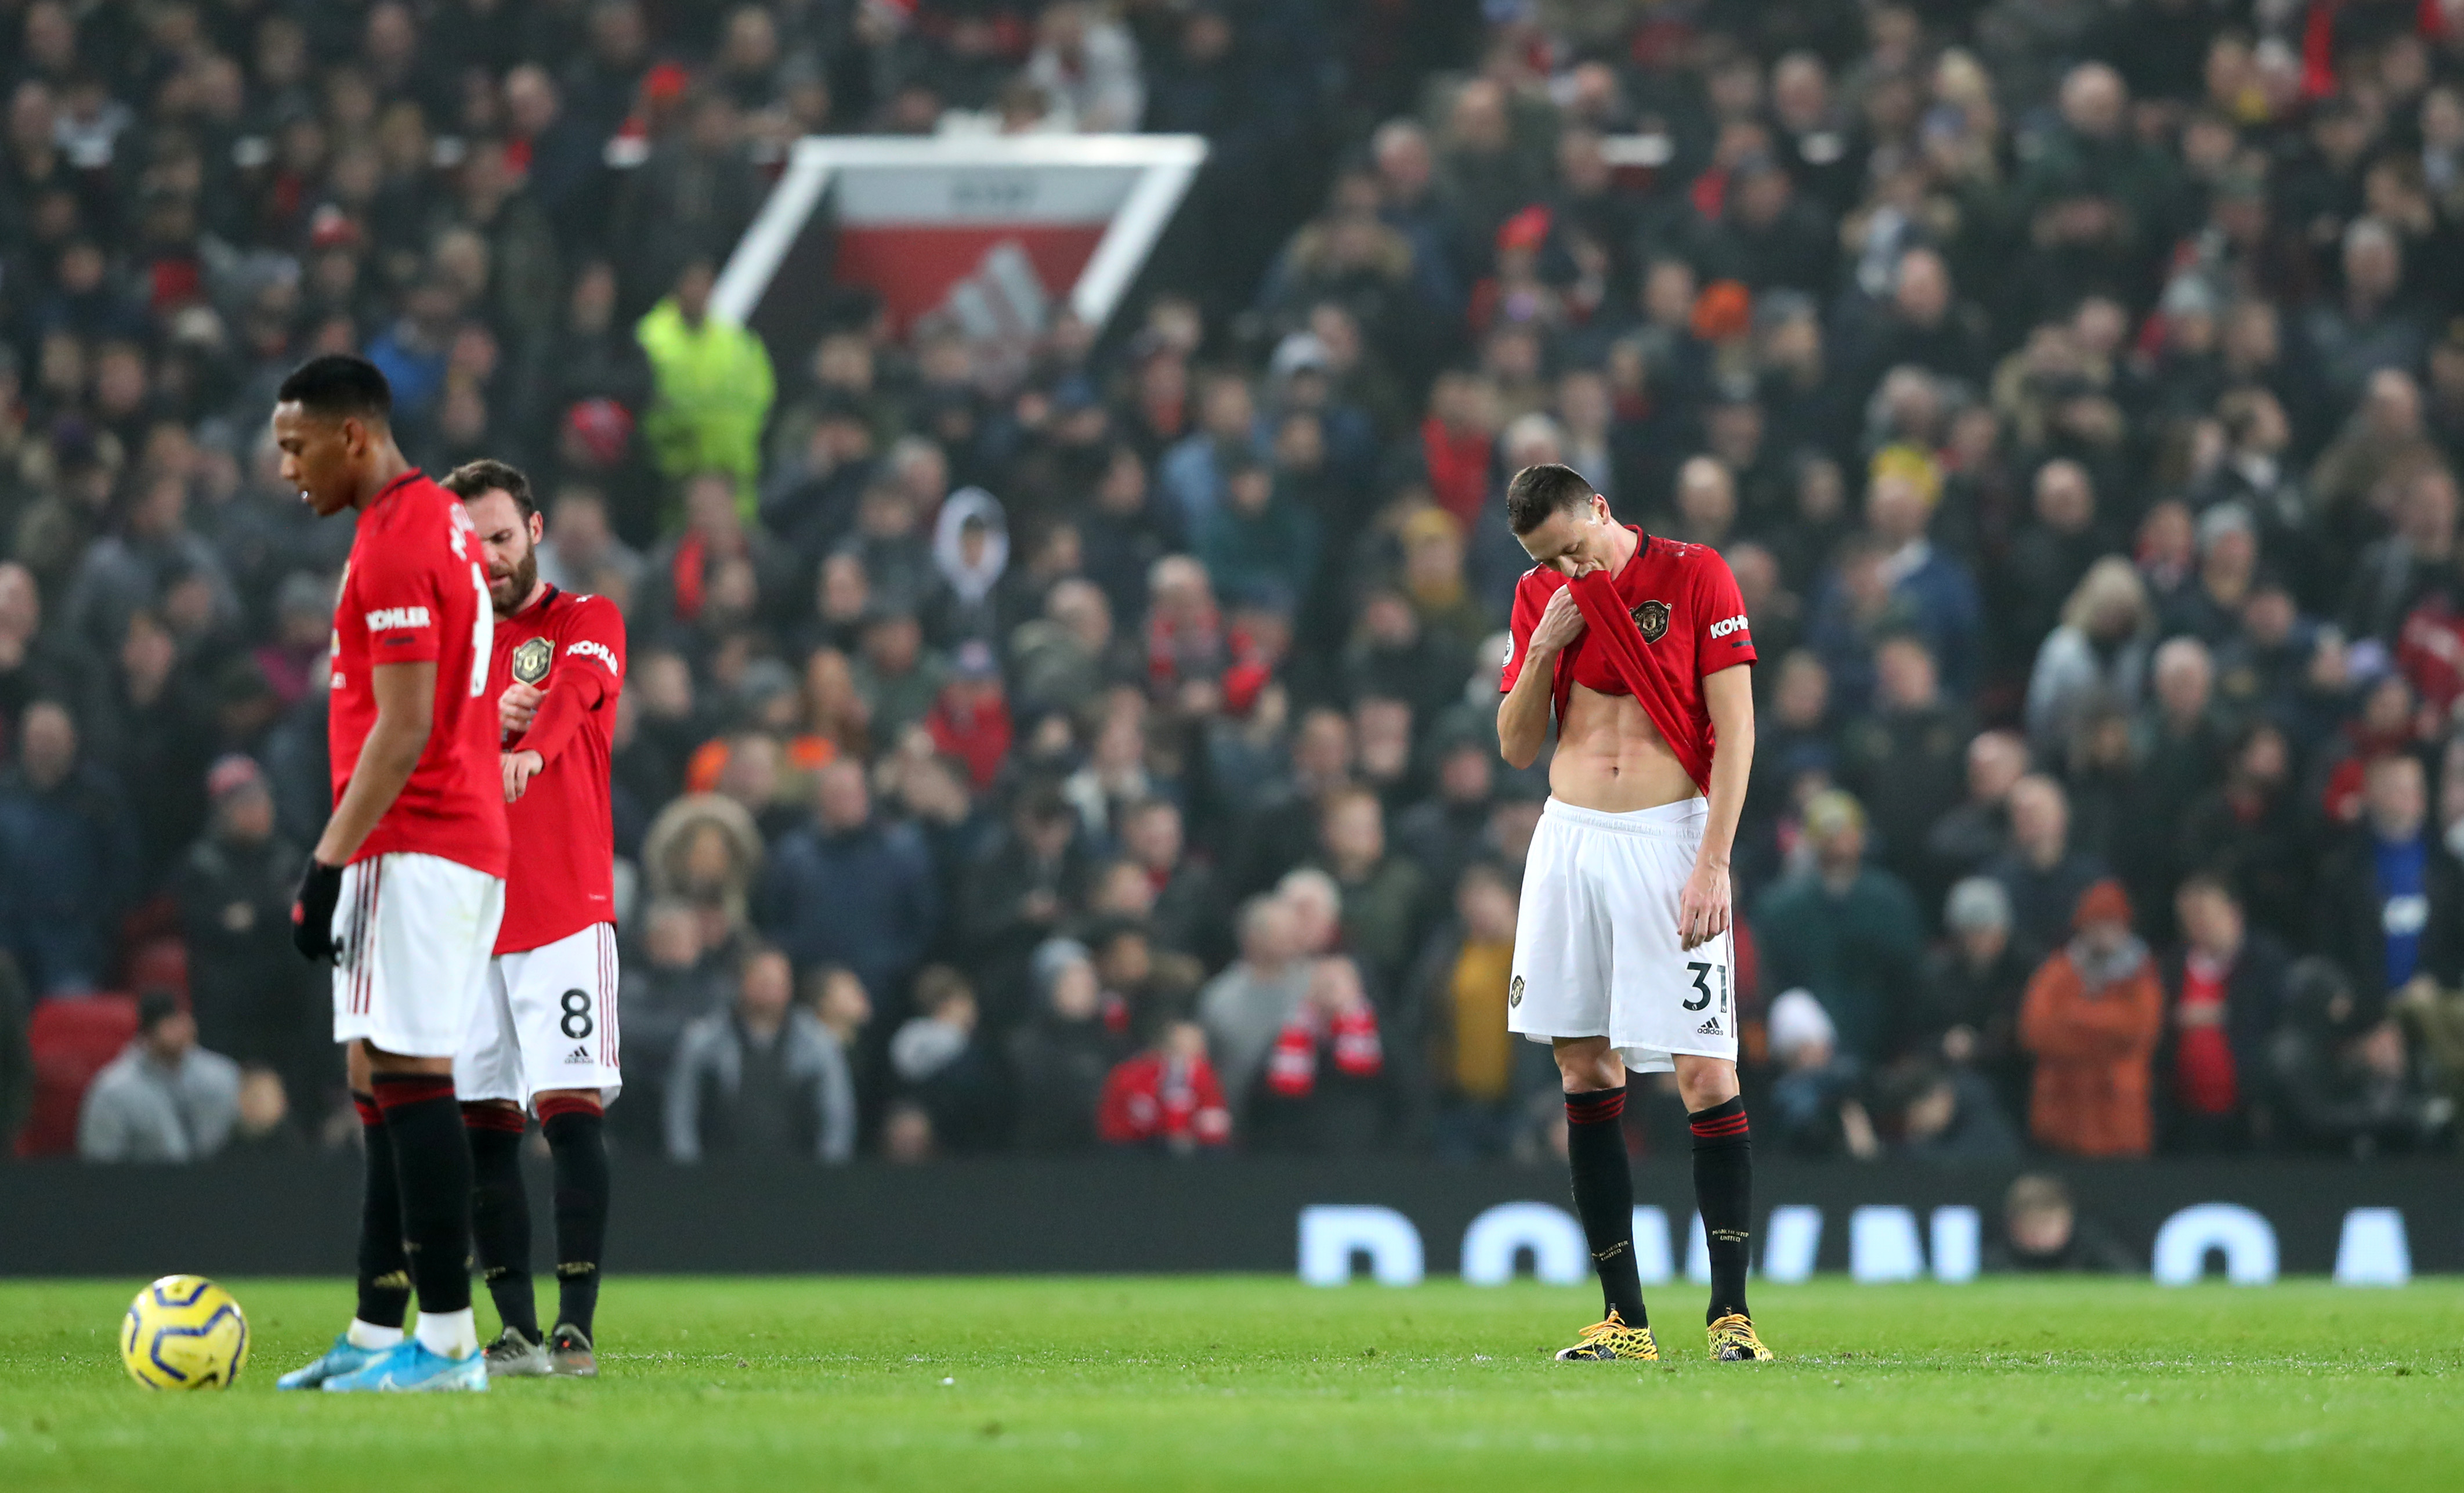 MANCHESTER, ENGLAND - JANUARY 22: Nemanja Matic of Manchester United reacts after his side concede their first goal  during the Premier League match between Manchester United and Burnley FC at Old Trafford on January 22, 2020 in Manchester, United Kingdom. (Photo by Alex Livesey/Getty Images)